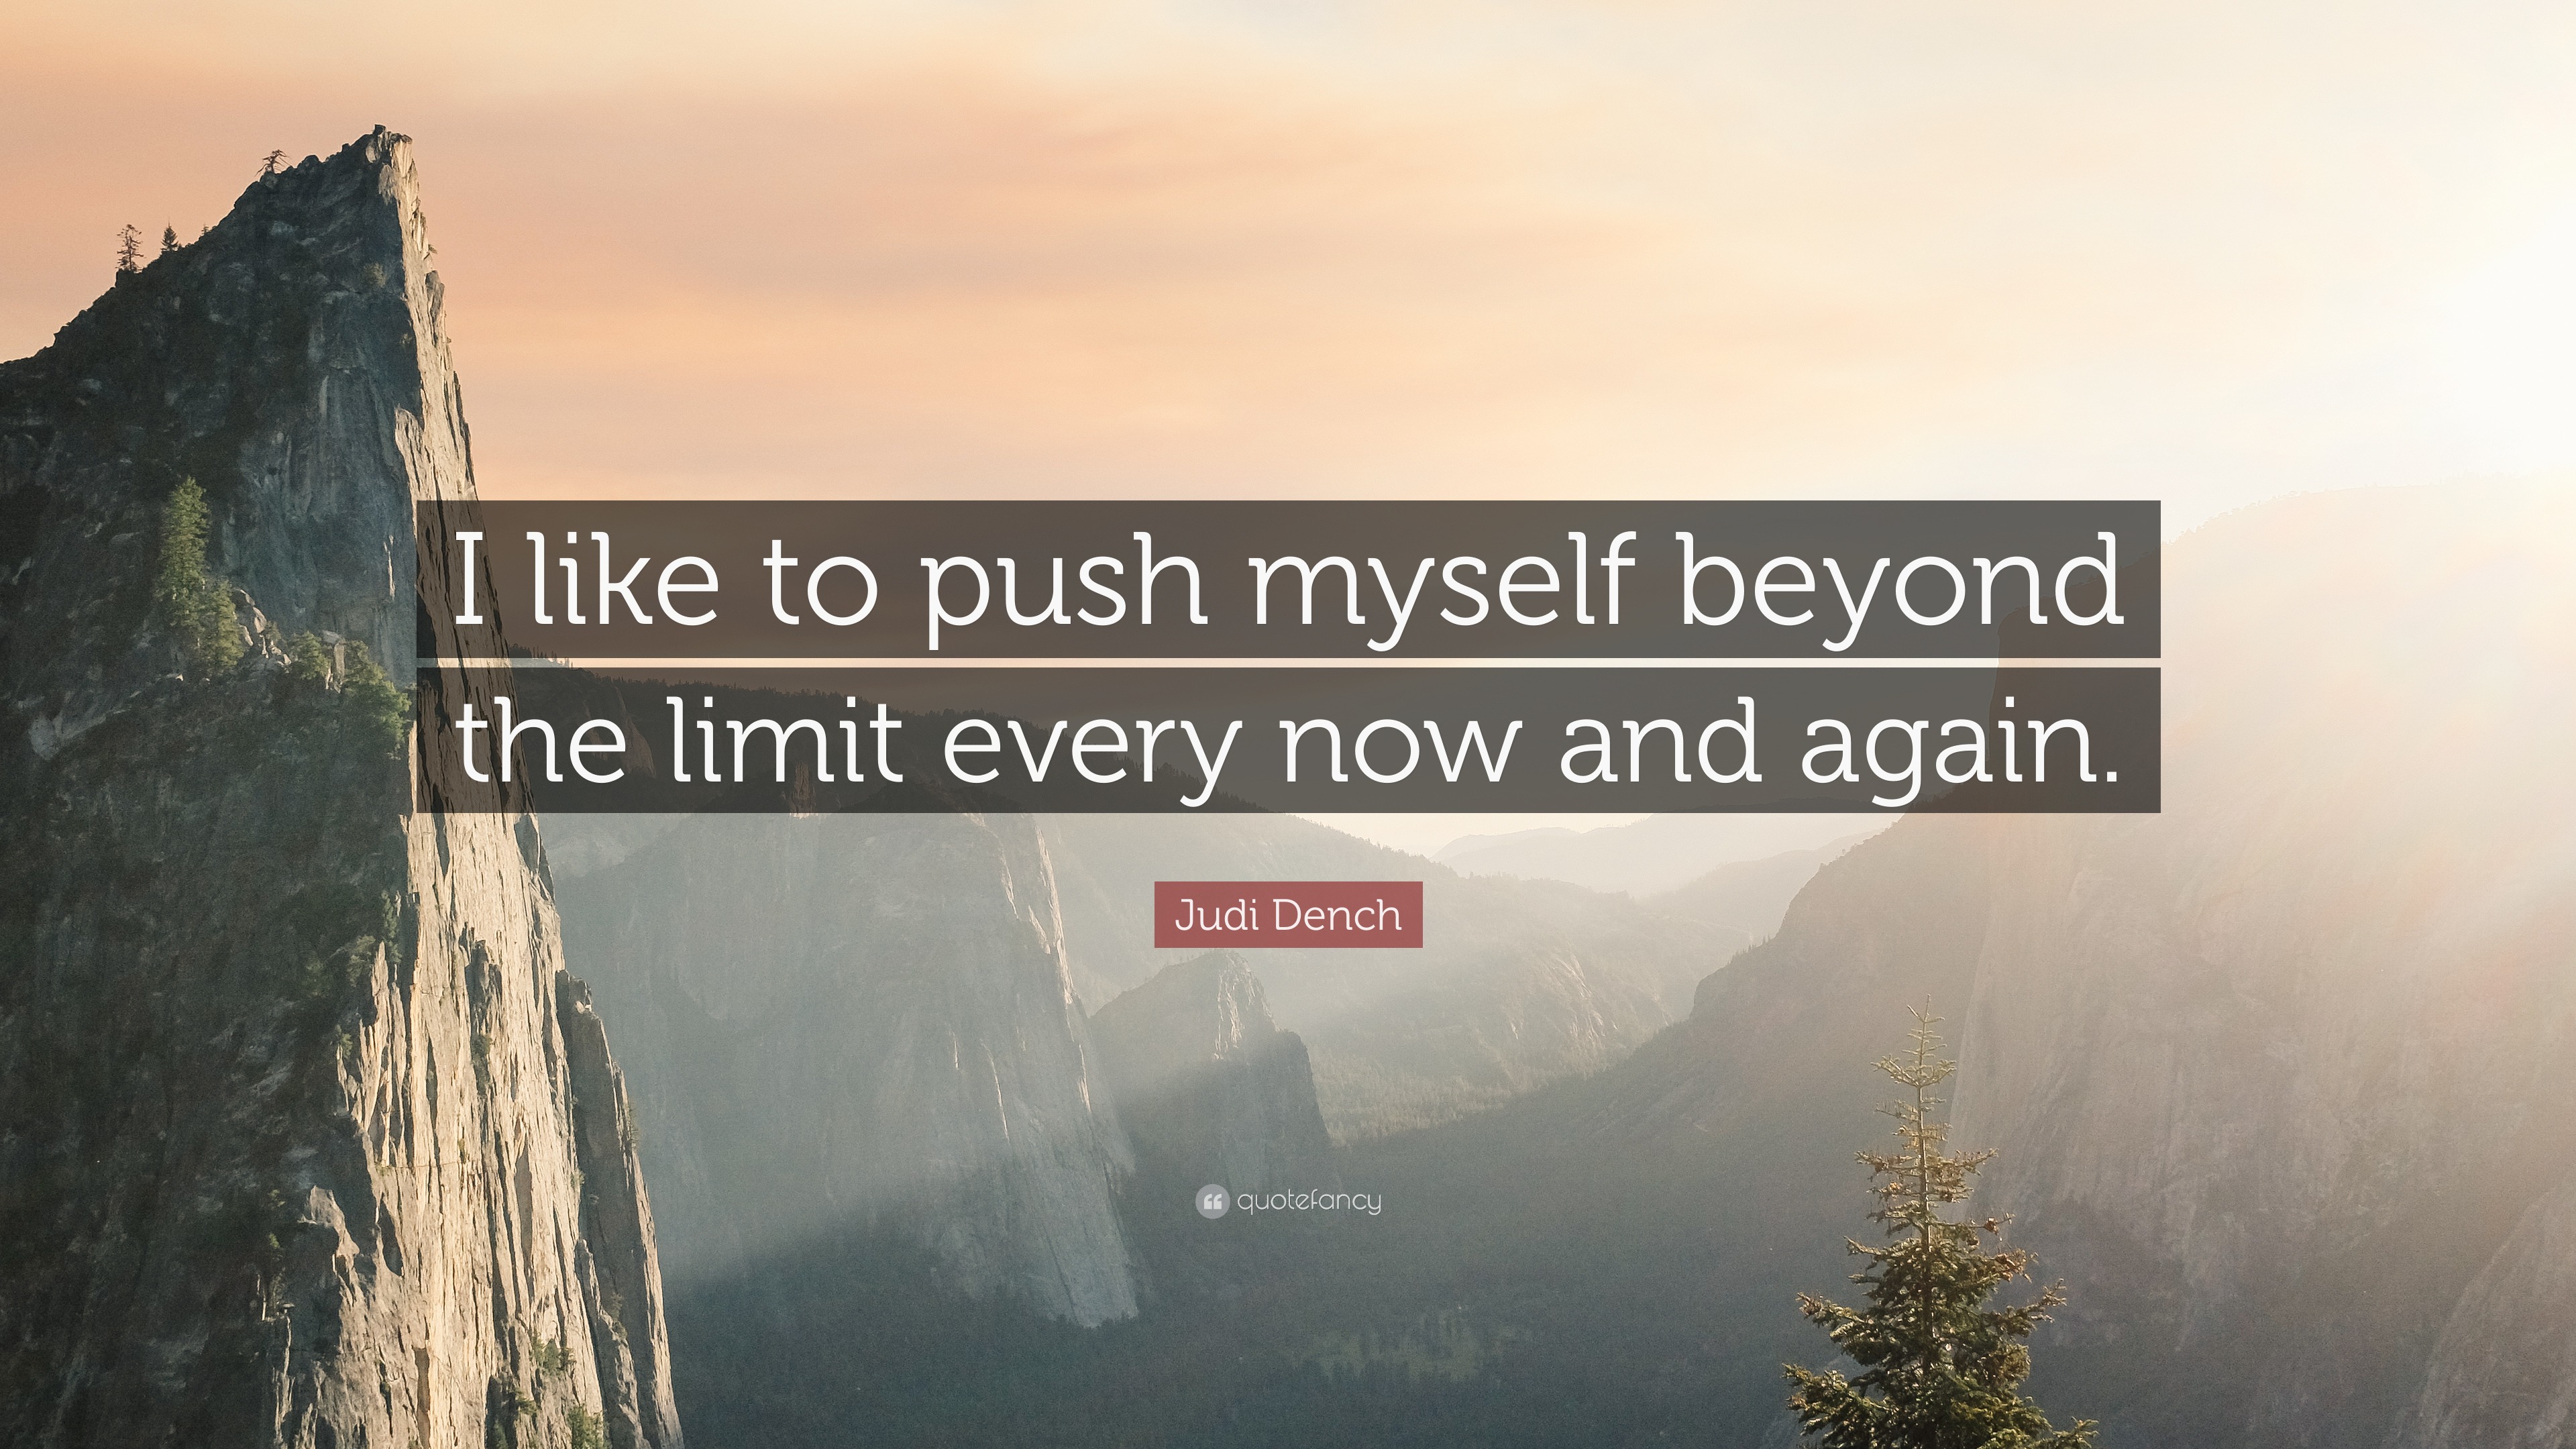 https://quotefancy.com/media/wallpaper/3840x2160/6250657-Judi-Dench-Quote-I-like-to-push-myself-beyond-the-limit-every-now.jpg